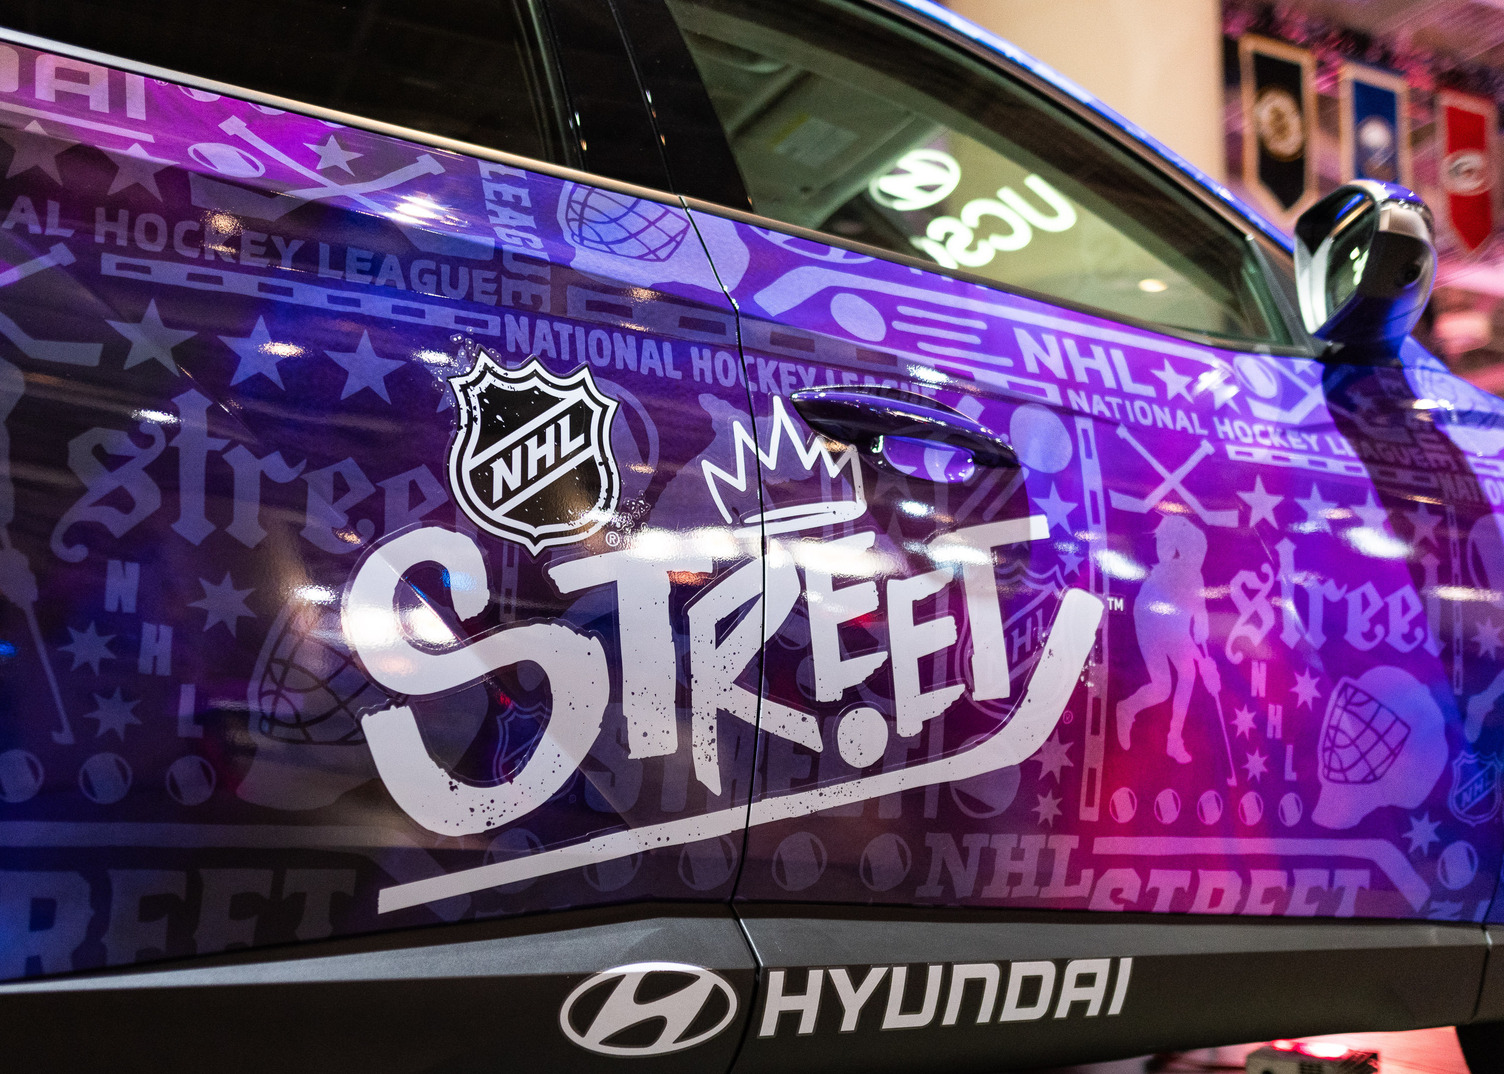 NHLSTREETs2